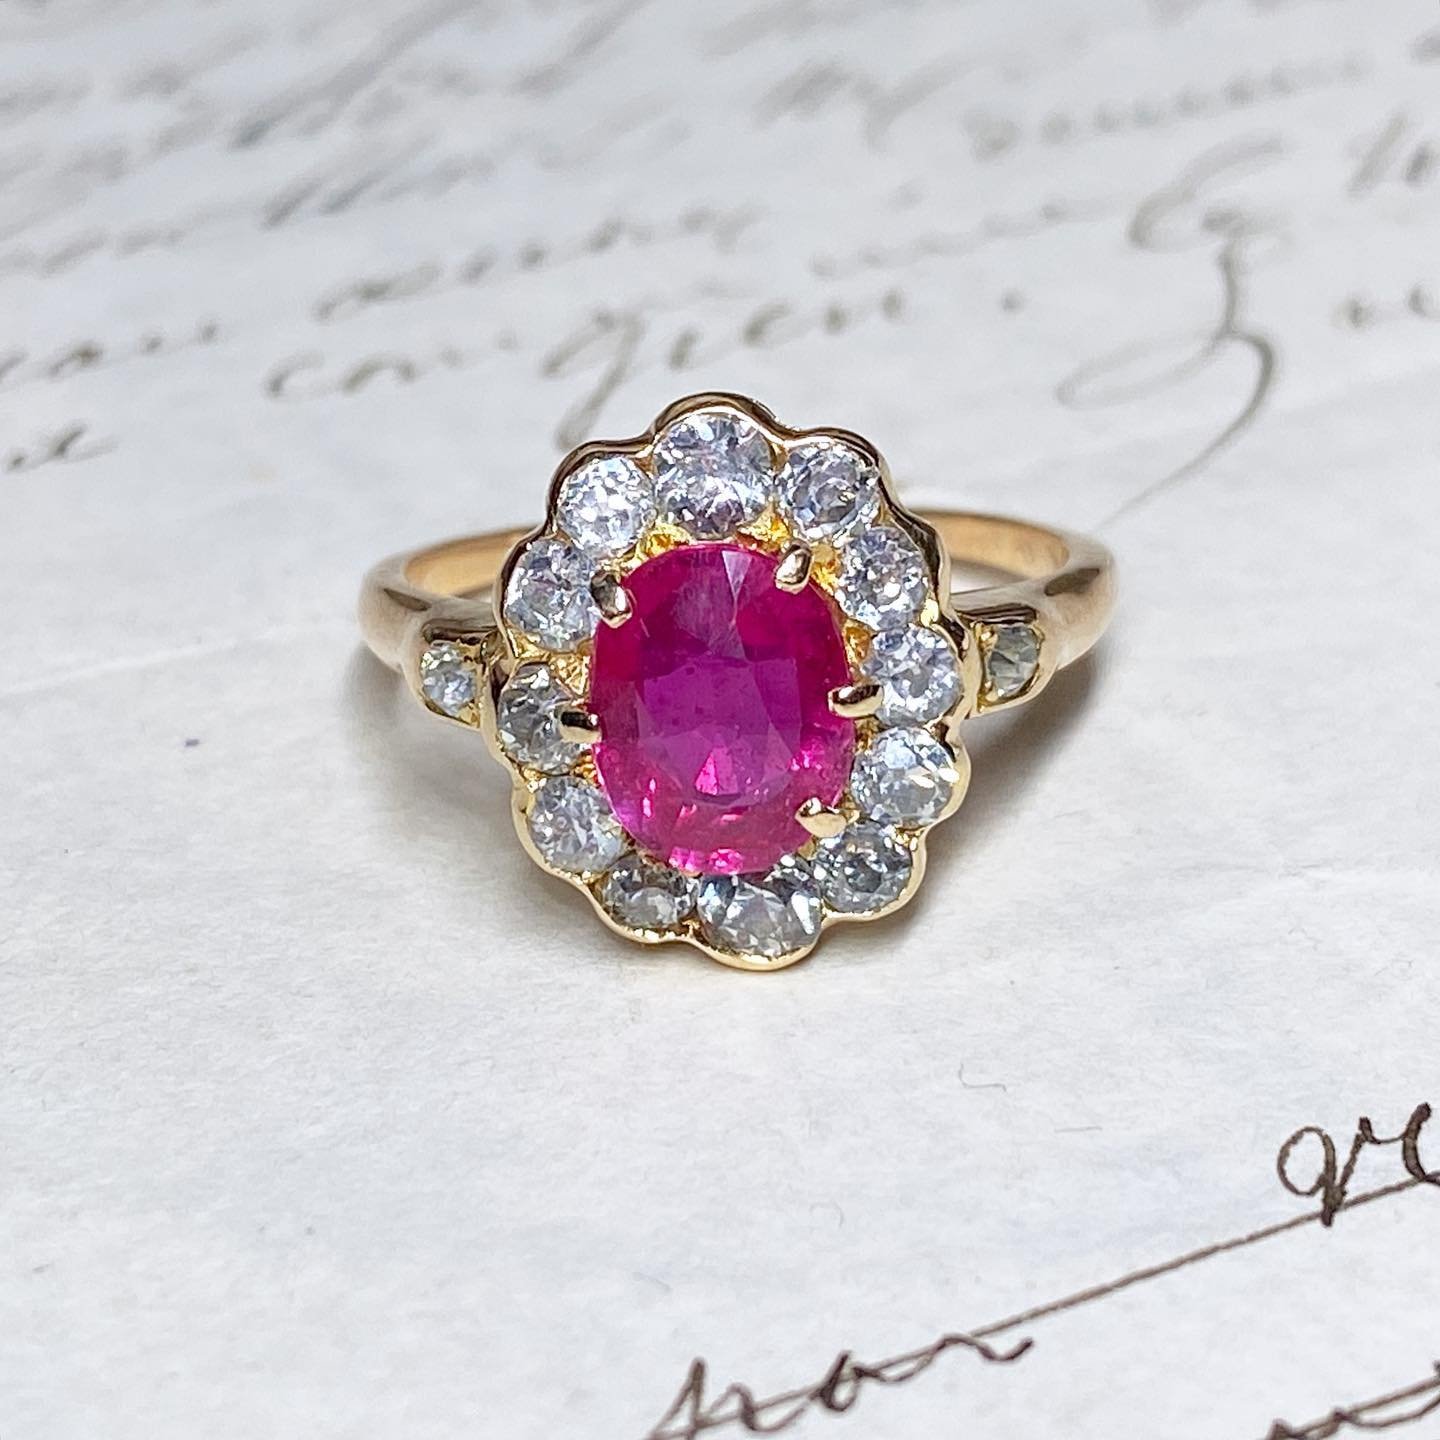 [Sold] - Beautiful antique ring in 18kt yellow gold set with with a pinkish-red Burmese ruby (heated) of +/- 2,5 ct and surrounded by old mine cut diamonds 😍

#antiquering#rubyring#victorianring#antiqueruby#burmaruby#belleepoquejewelry#oldminecutdia